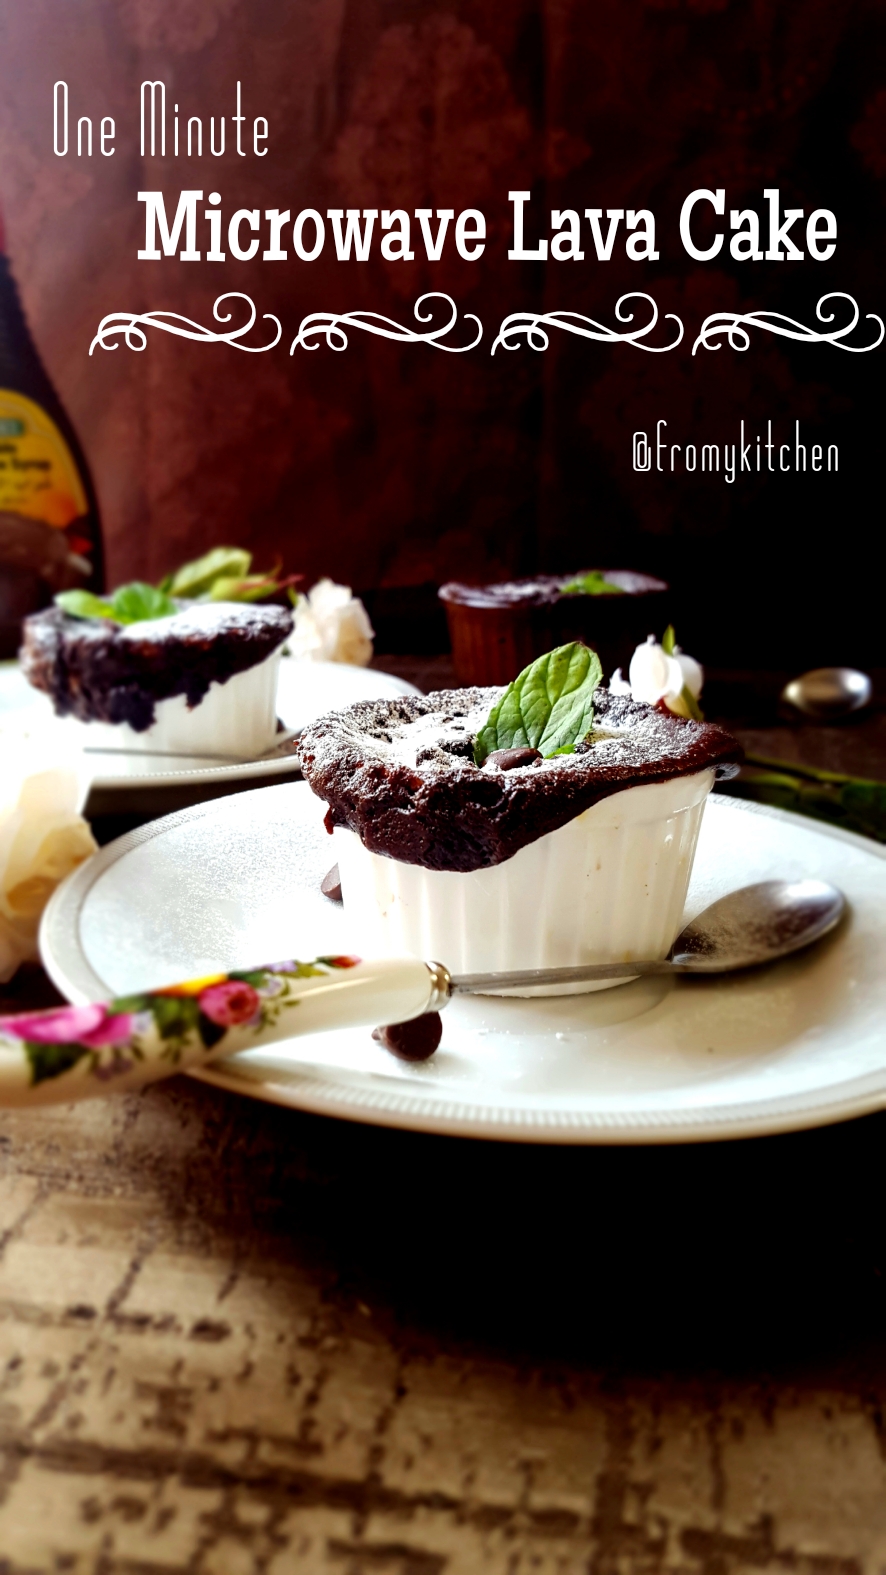 One Minute Microwave Lava Cake